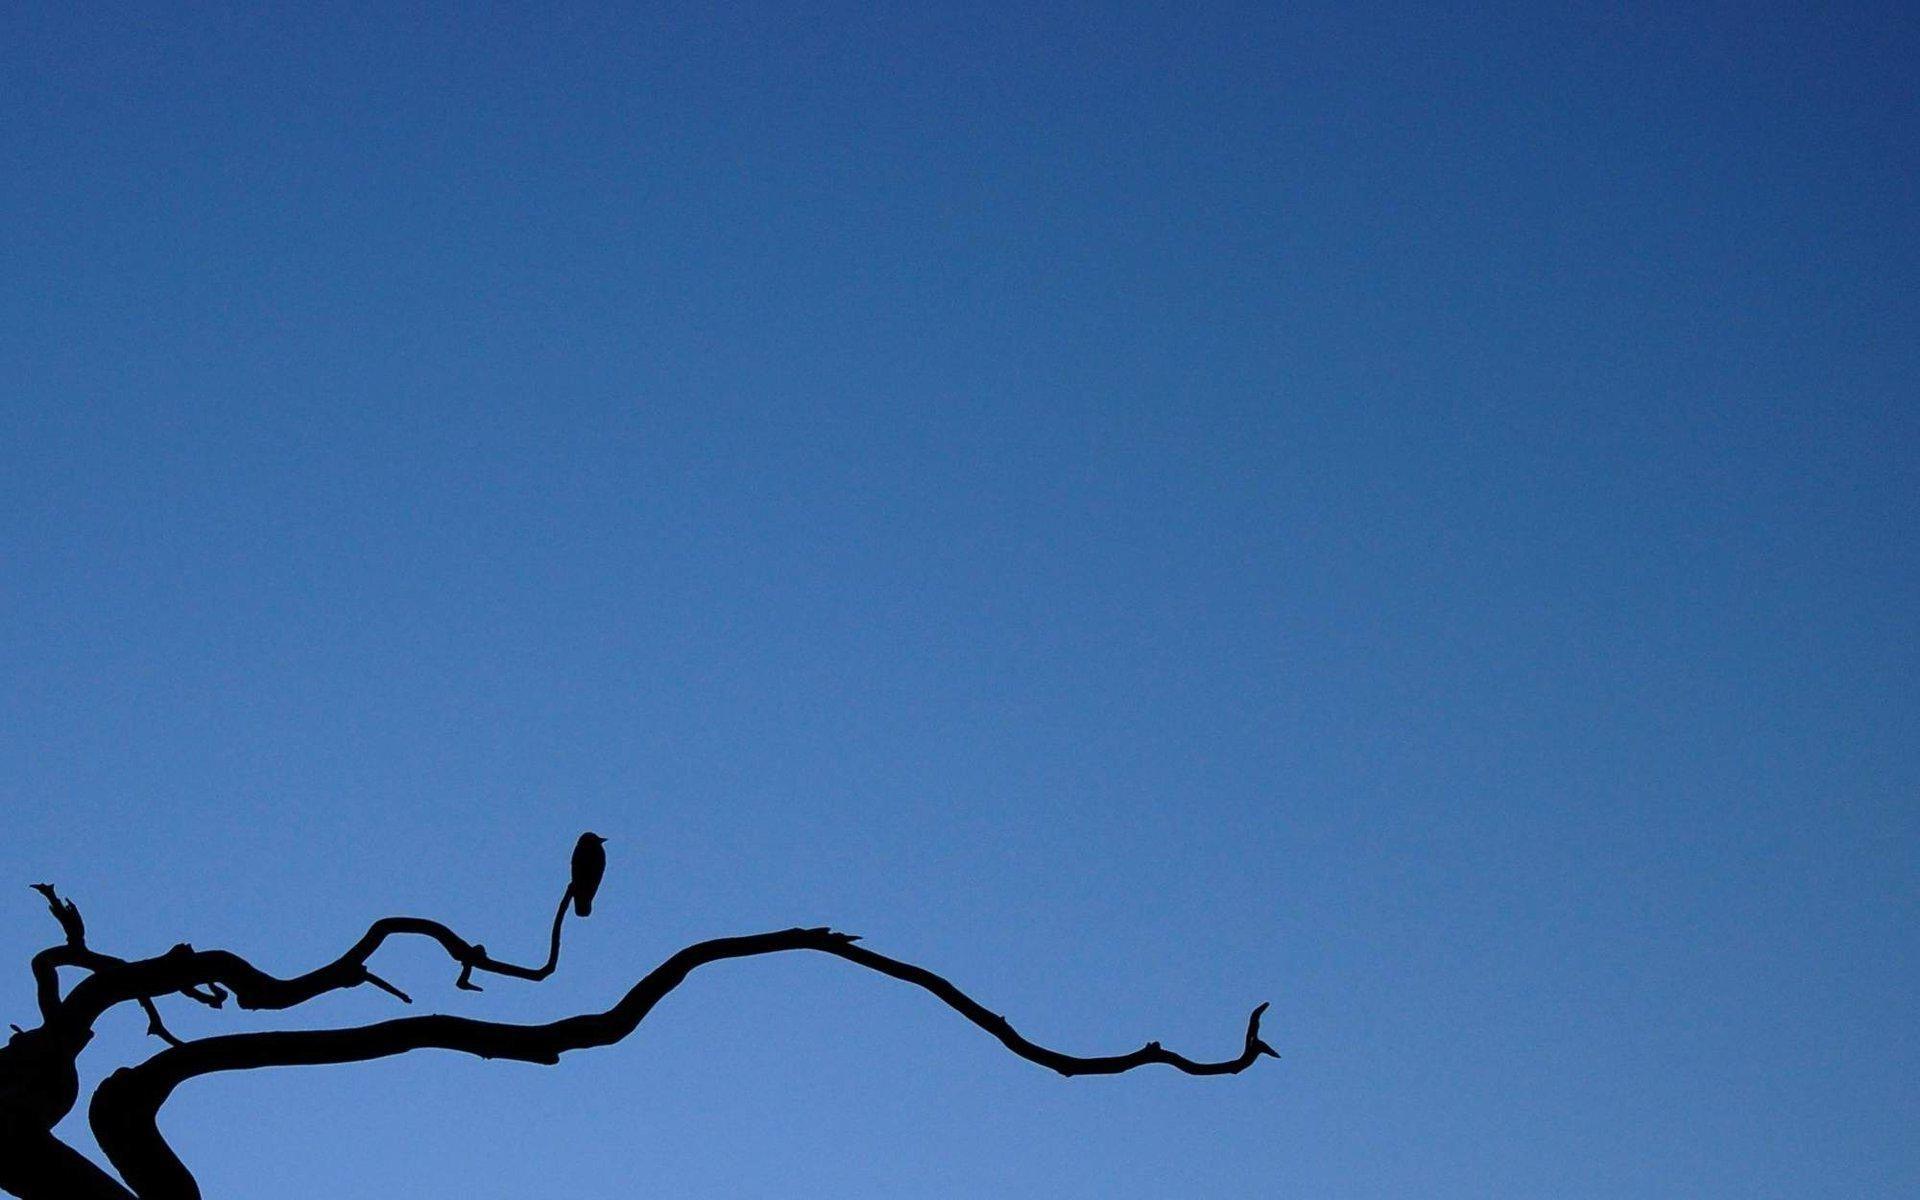 Small Bird Silhouette on Tree Against Blue Sky Wallpaper and Photo